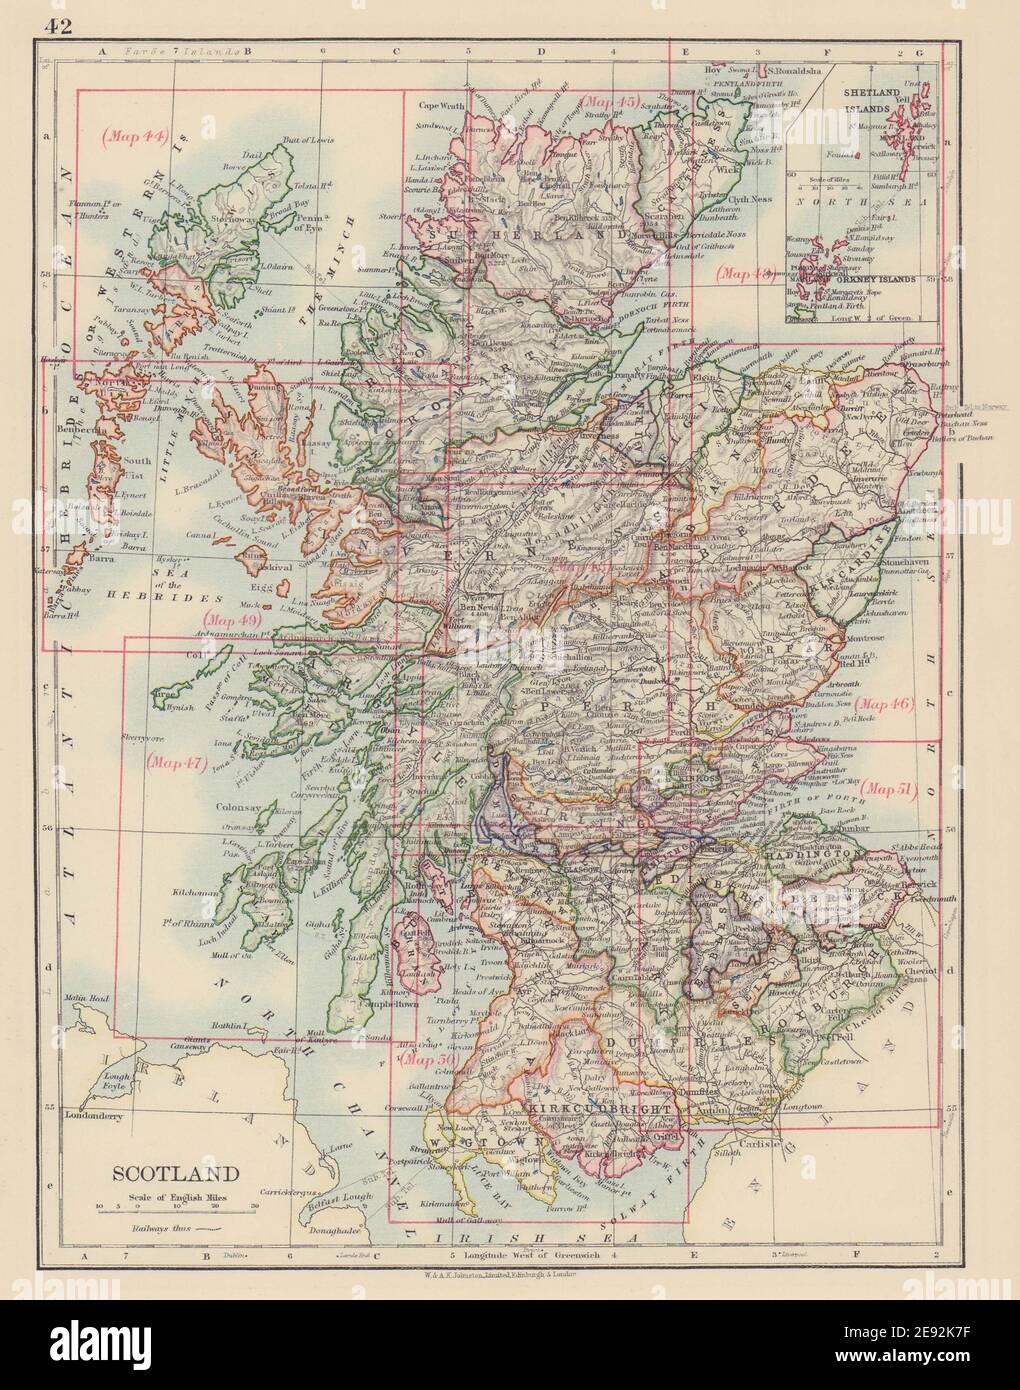 SCOTLAND. Counties. Undersea Telegraph cables. JOHNSTON 1901 old antique map Stock Photo